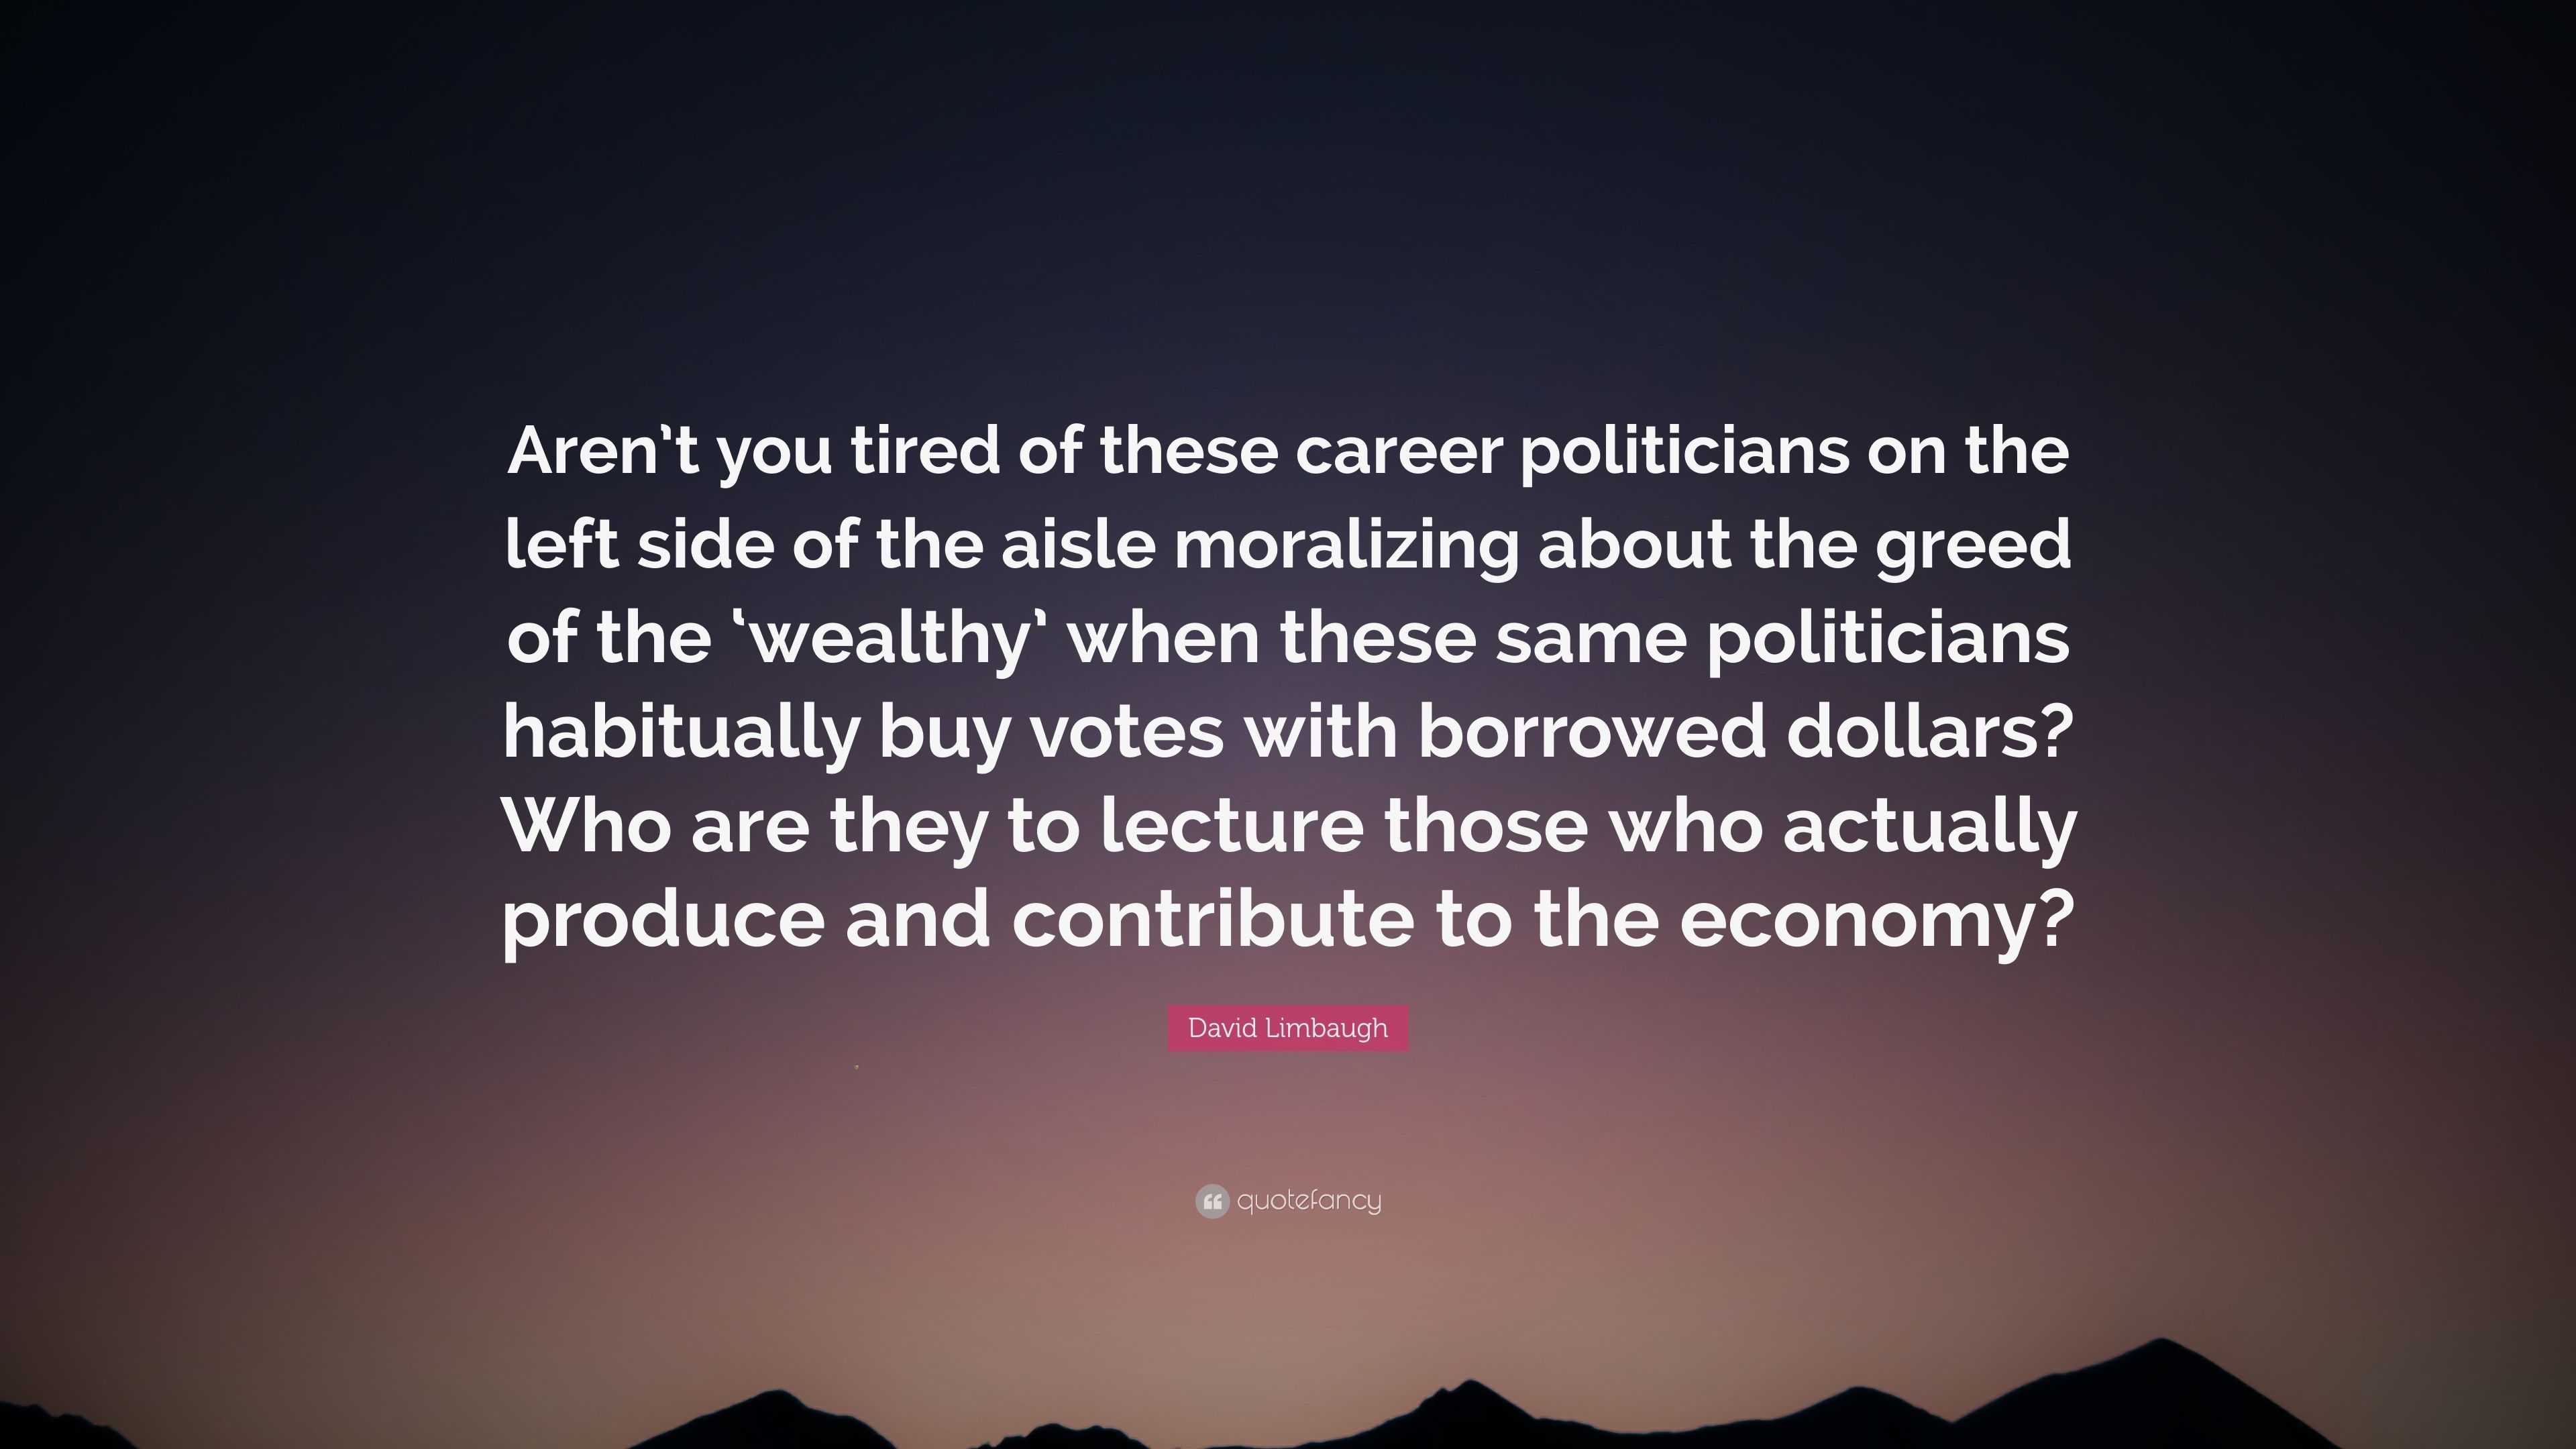 David Limbaugh Quote Aren T You Tired Of These Career Politicians On The Left Side Of The Aisle Moralizing About The Greed Of The Wealthy W 7 Wallpapers Quotefancy